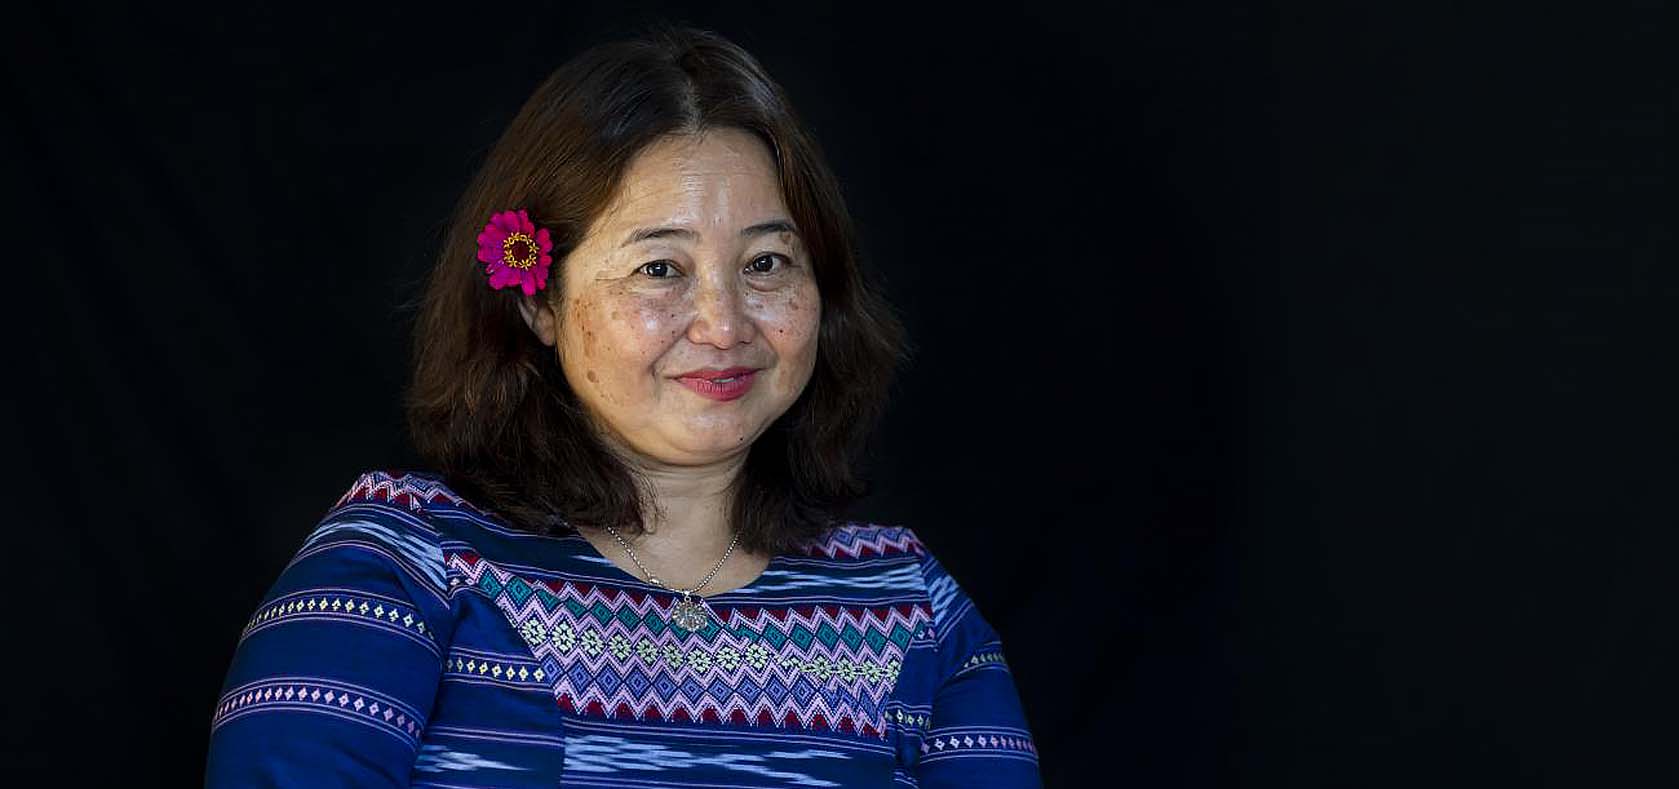 Naw Bway Khu, 54, a nurse of Karen ethnicity, founded Meikswe Myanmar, meaning 'Friends of Myanmar'. Photo: UNHCR/Hkun Ring